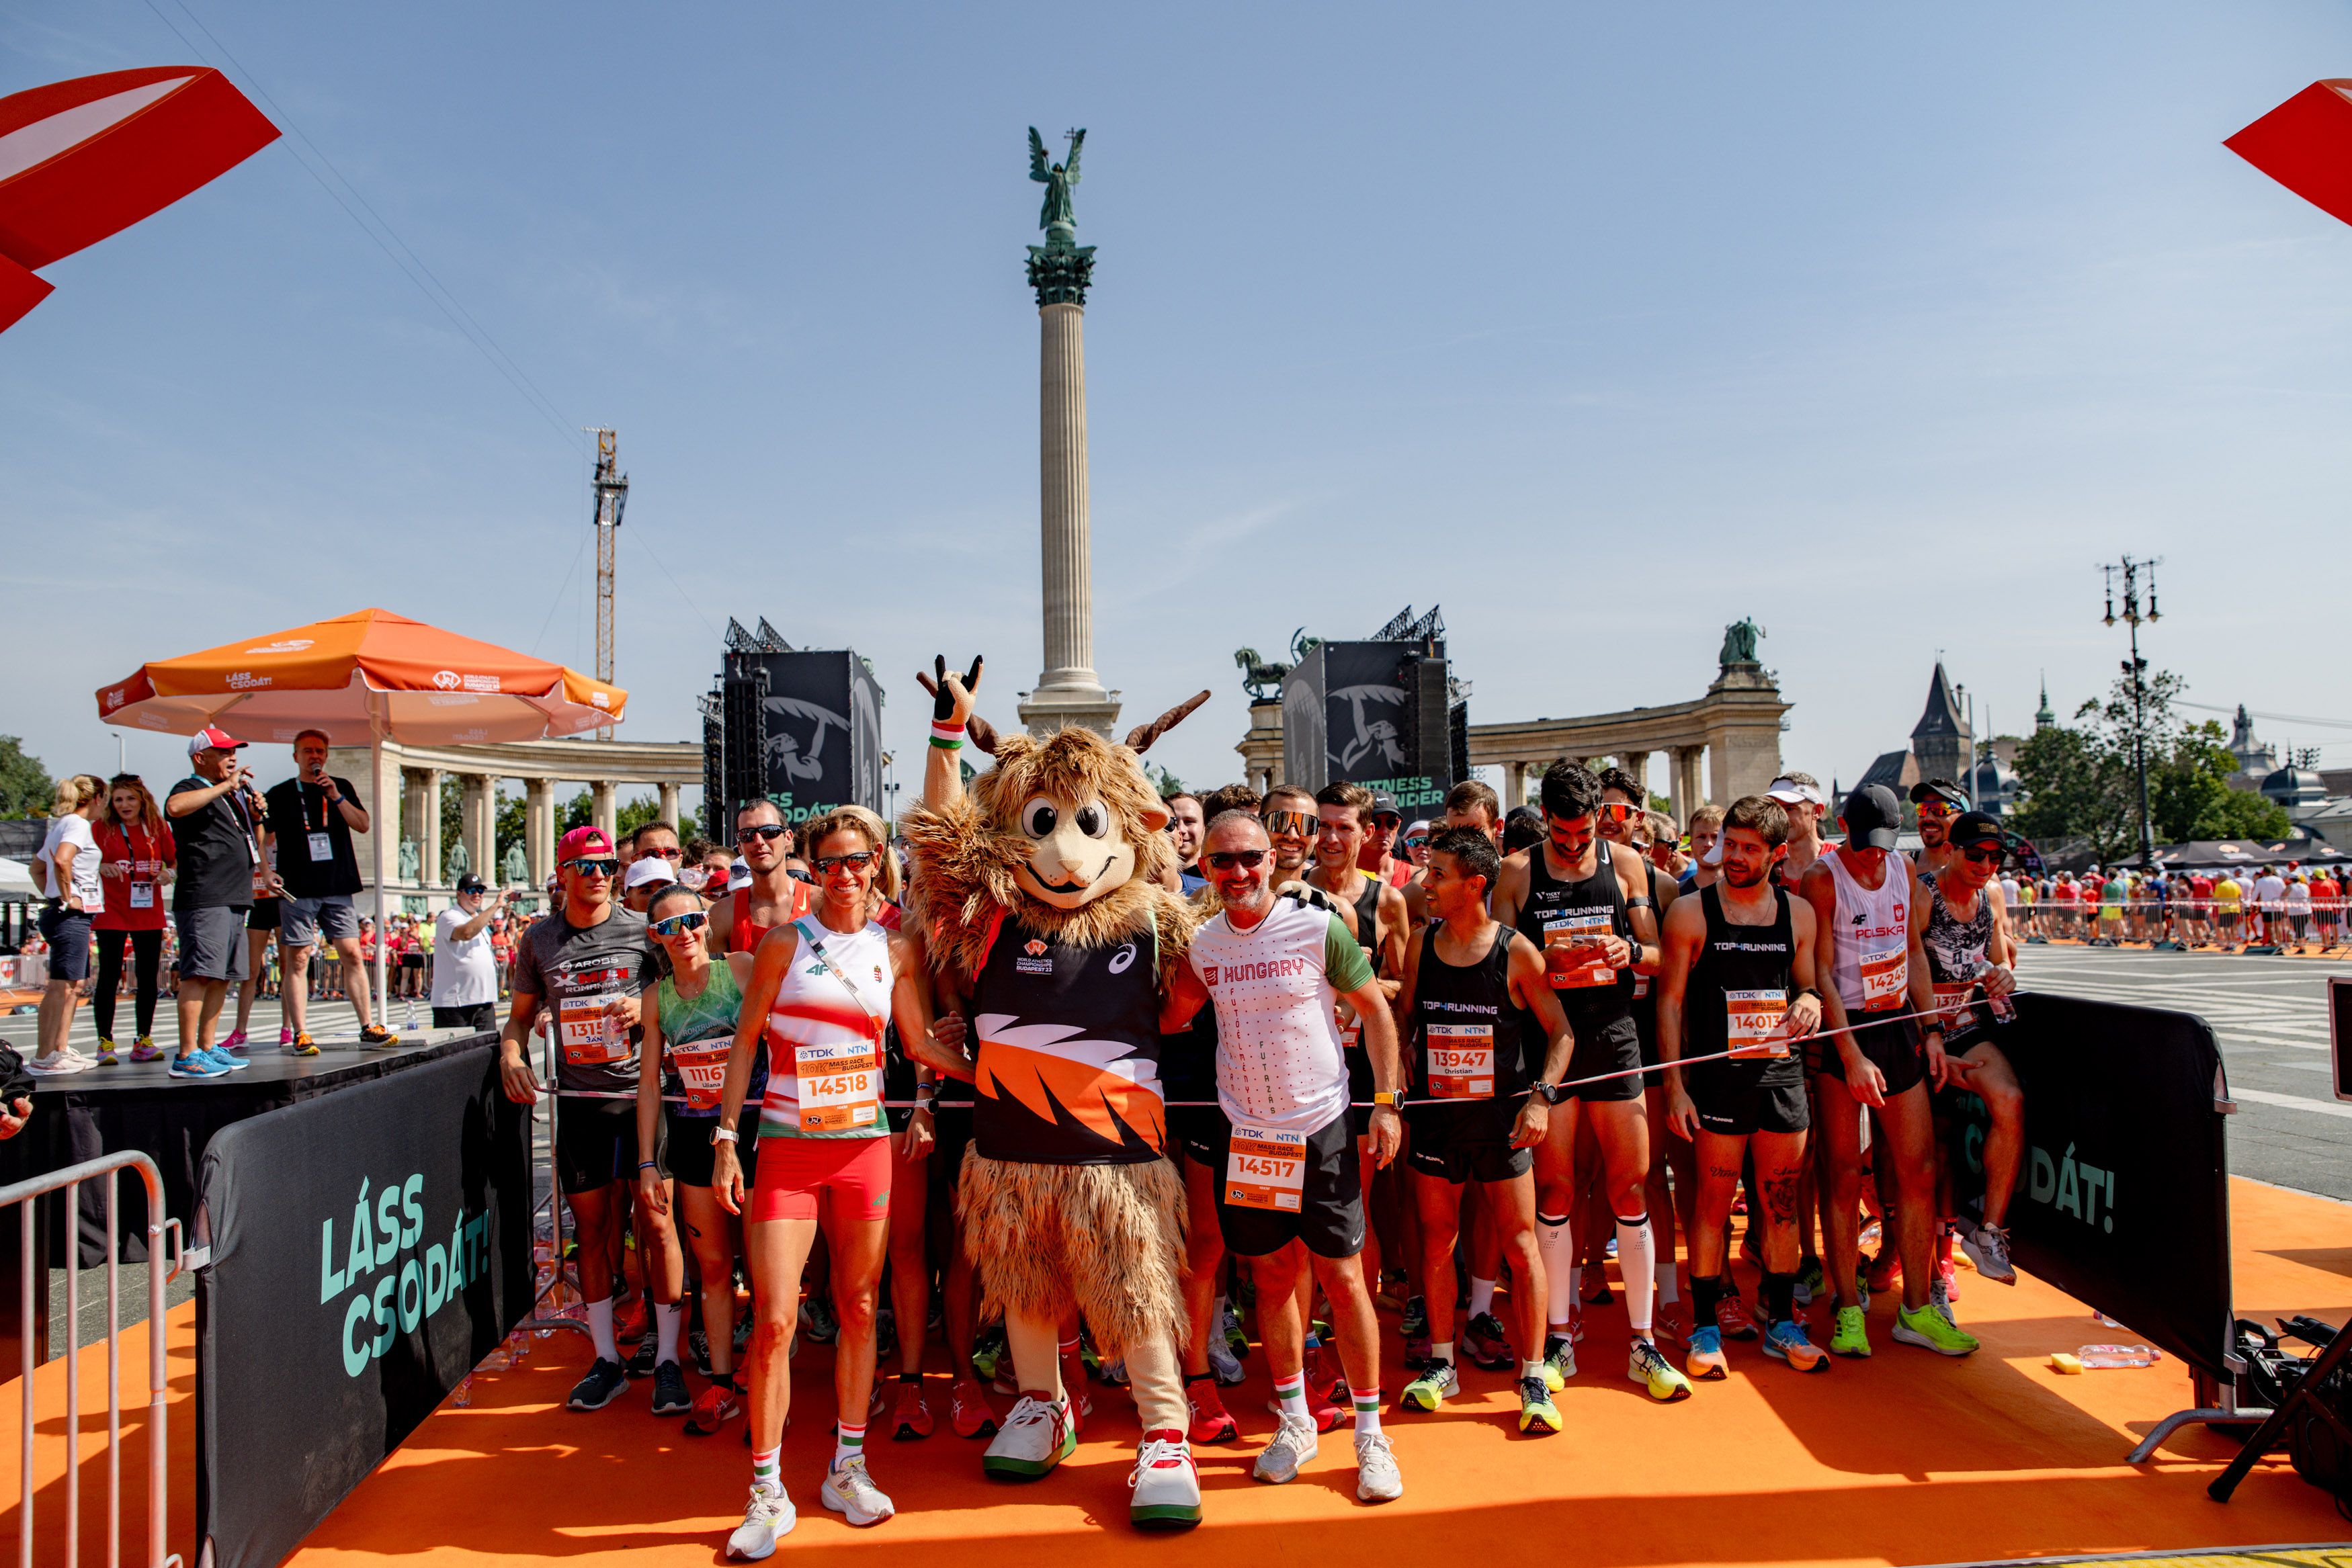 A real celebration 6,000 runners from 70 countries competed in the